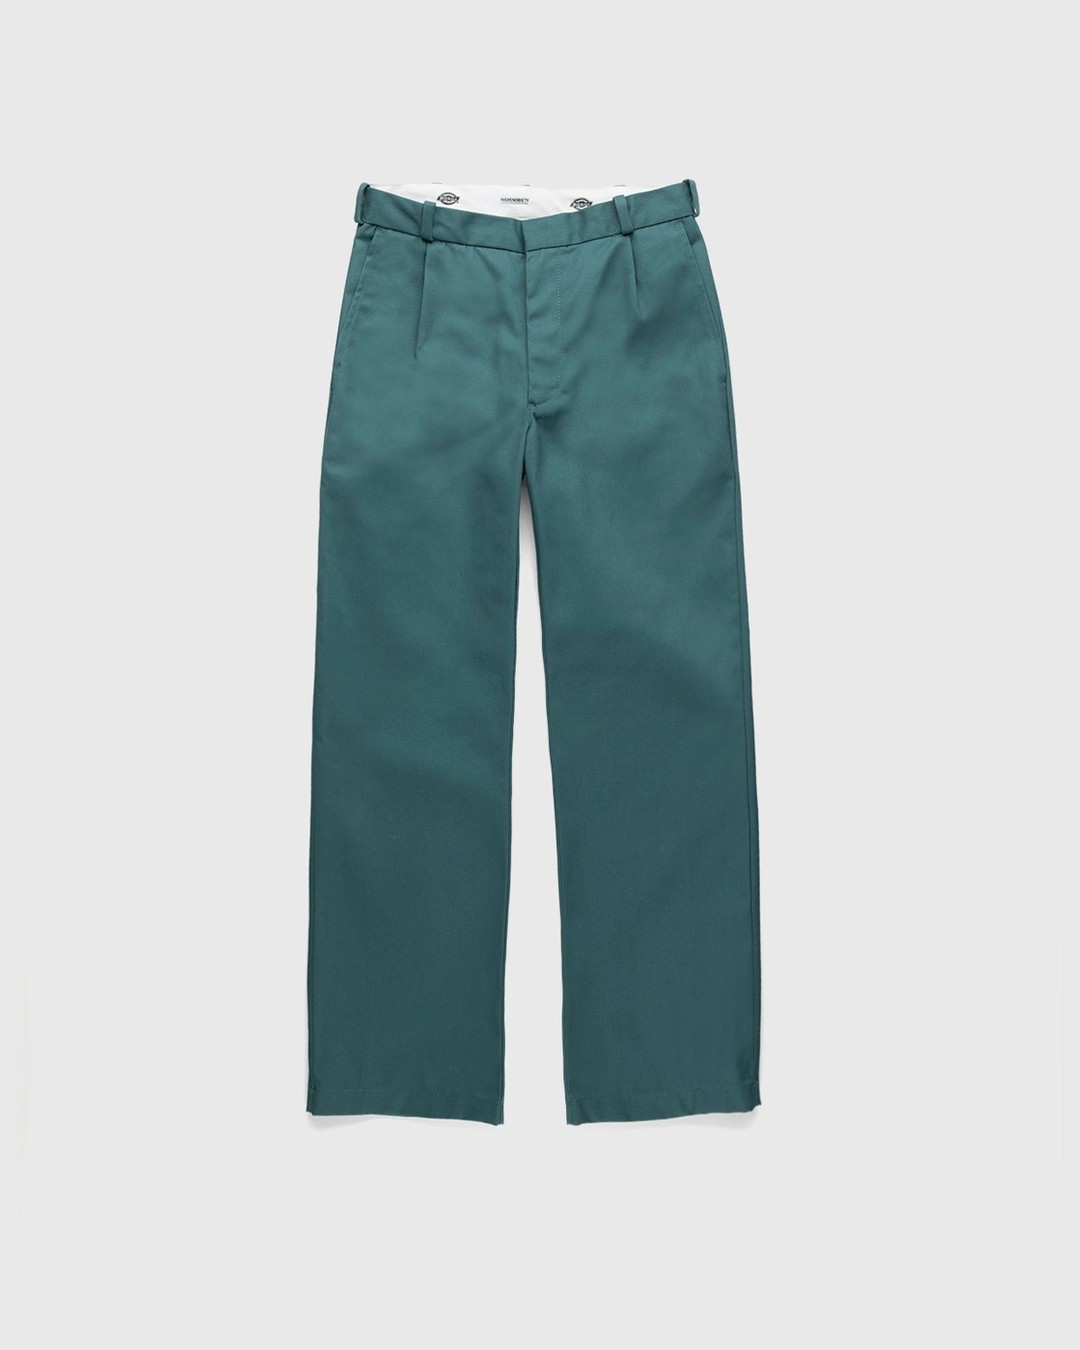 Highsnobiety x Dickies – Pleated Work Pants Lincoln Green - Work Pants - Green - Image 1